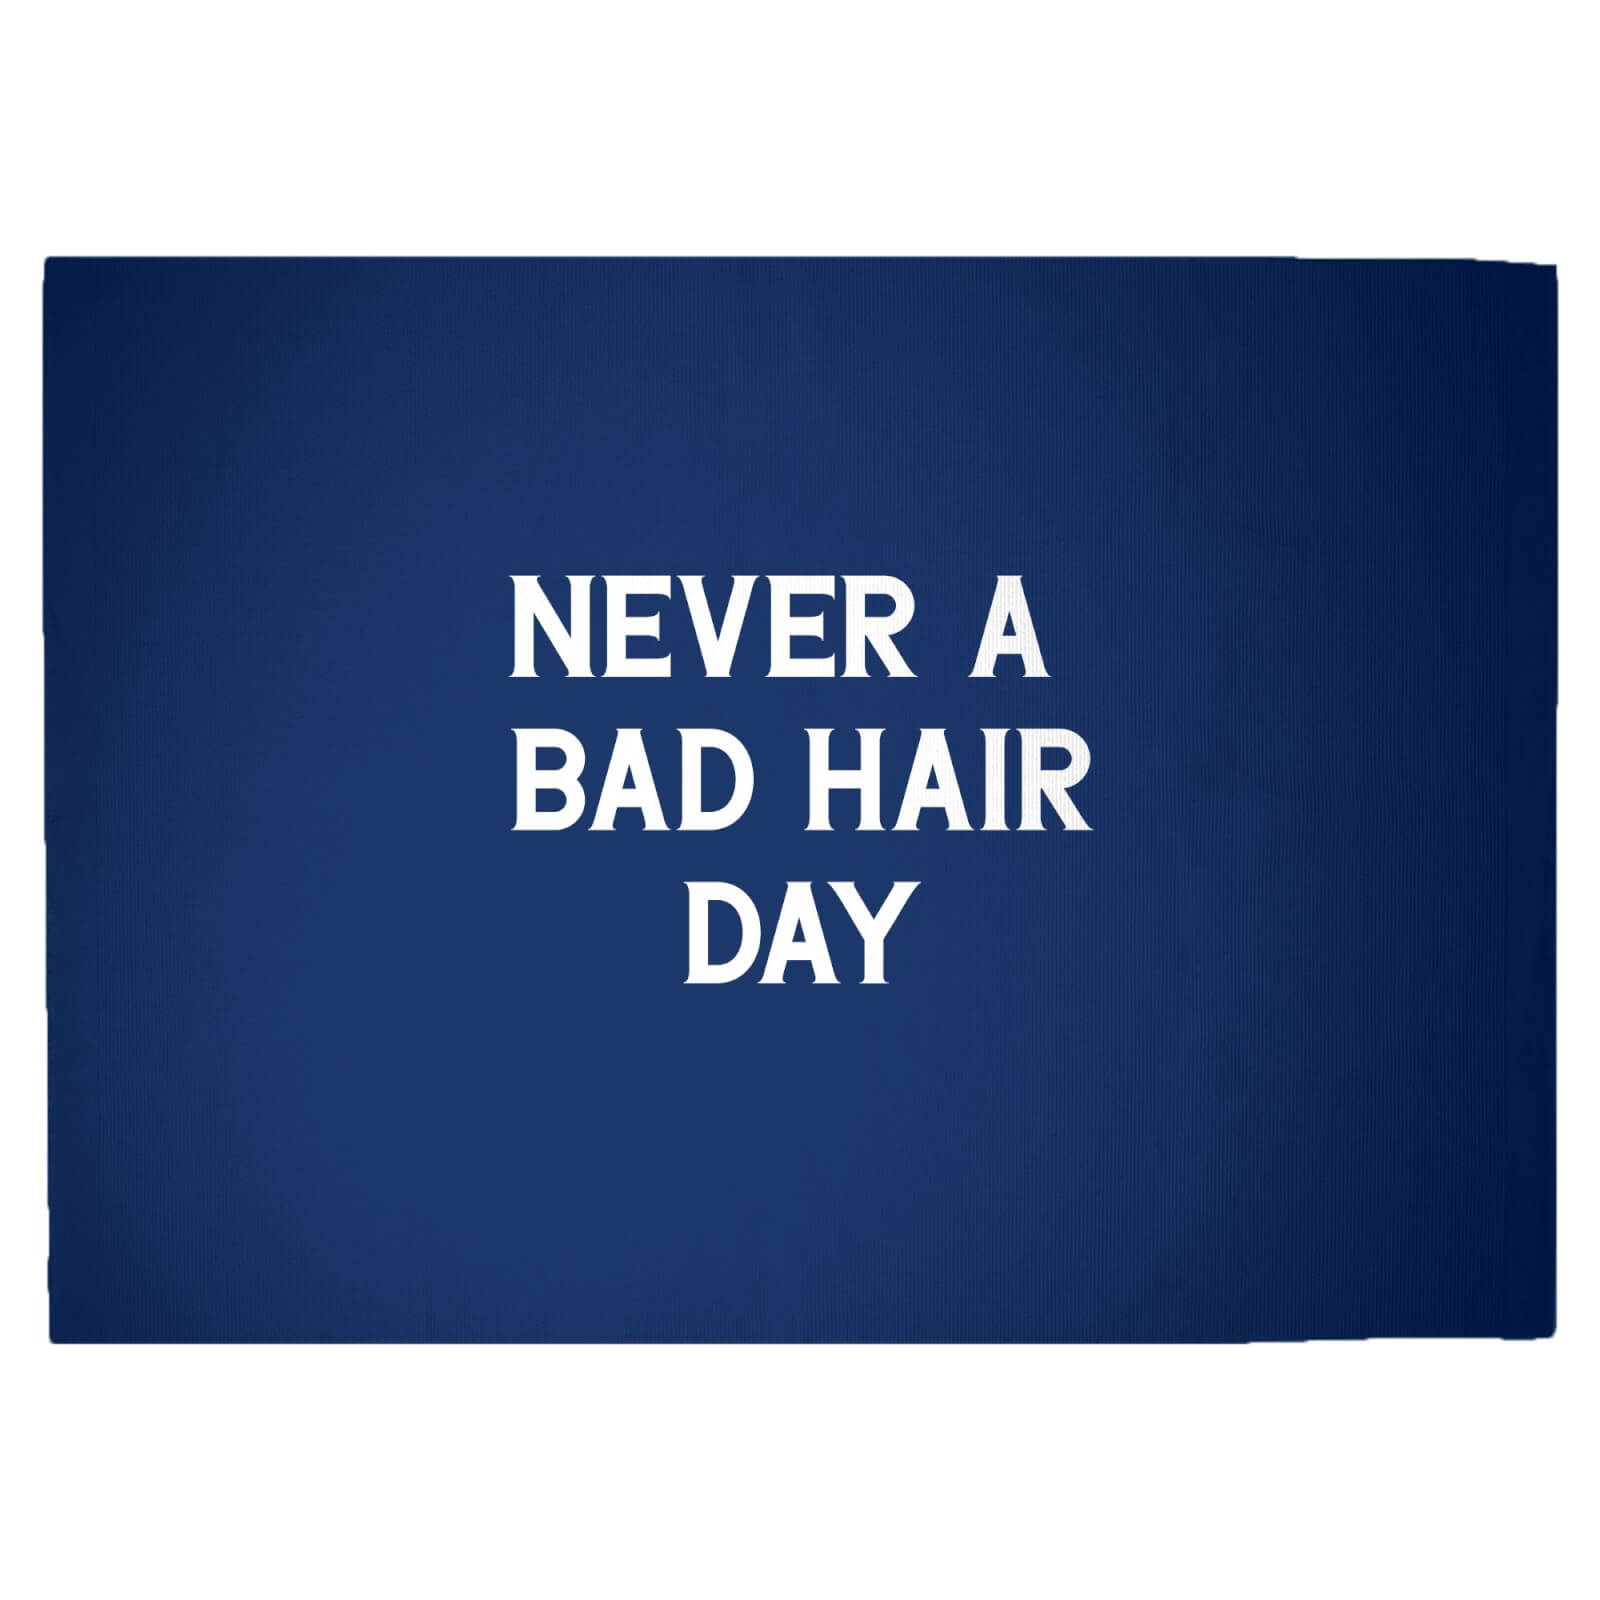 Never A Bad Hair Day Woven Rug - Large